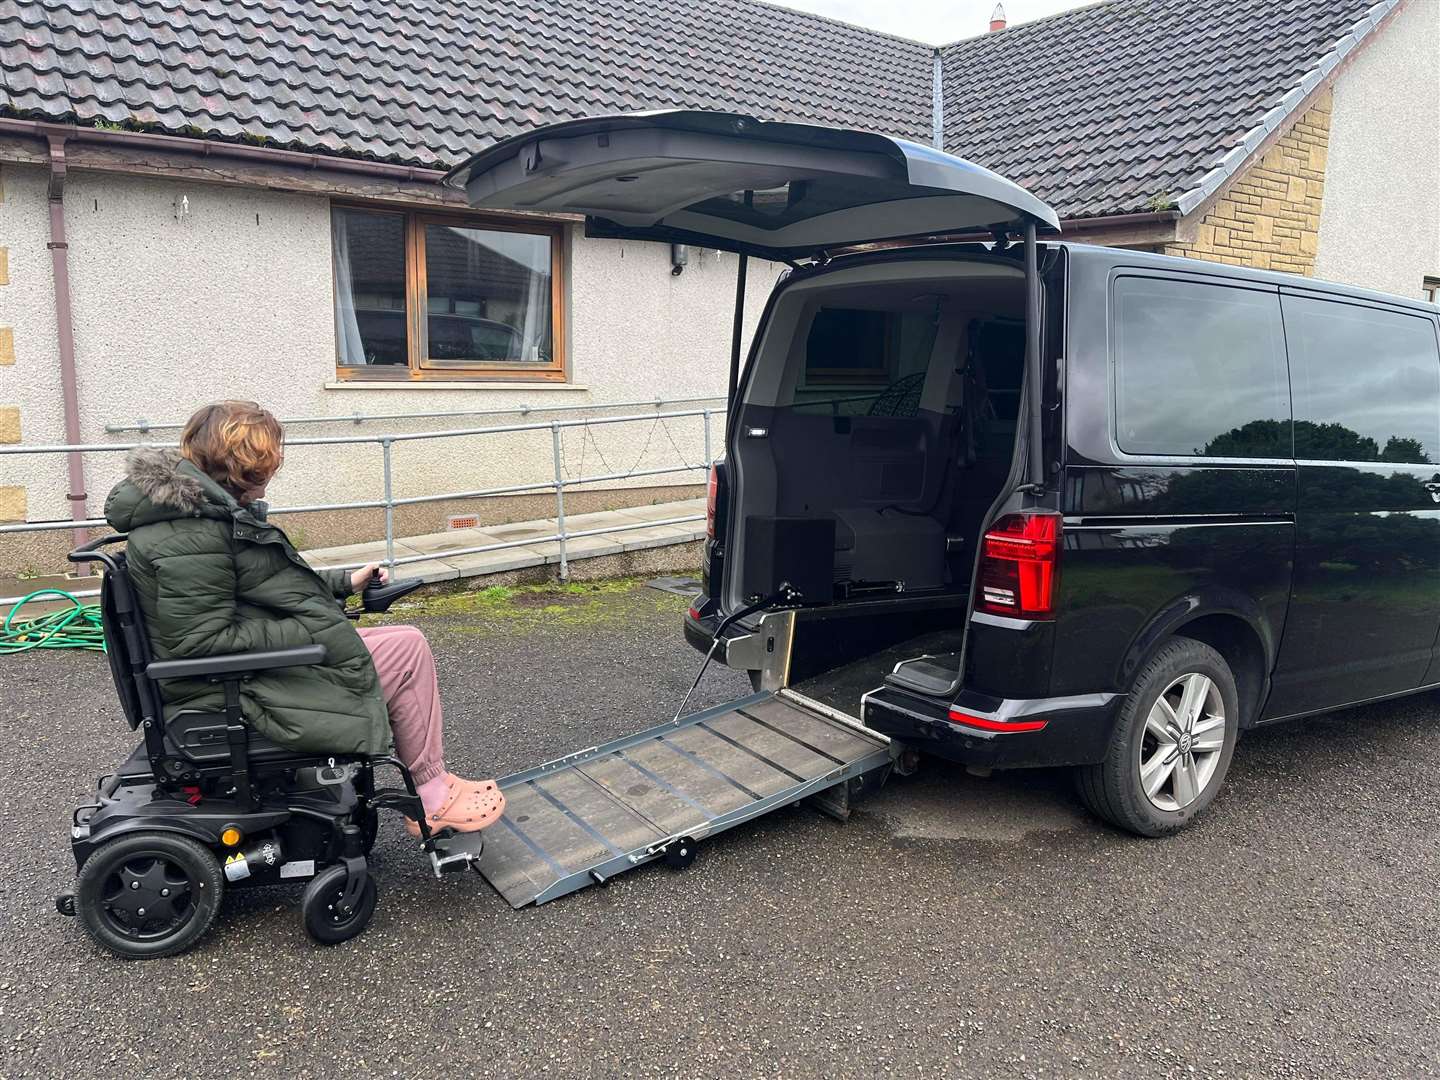 Miss Murphy going up the ramp of her wheelchair accessible vehicle. She blames potholes for causing damage to the ramp mechanism.